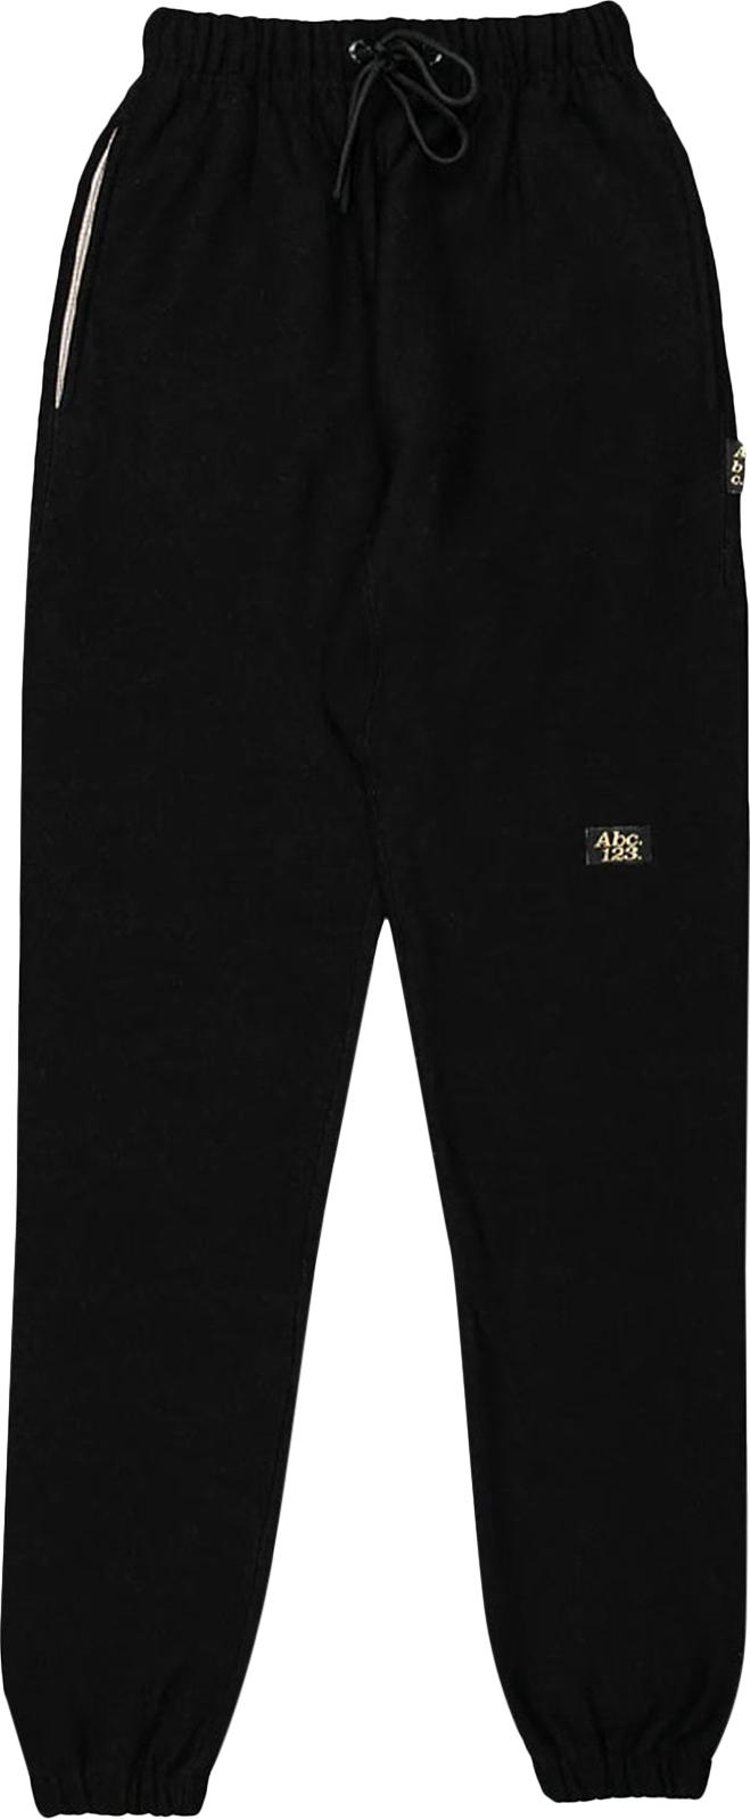 Advisory Board Crystals Sweatpants 'Anthracite'